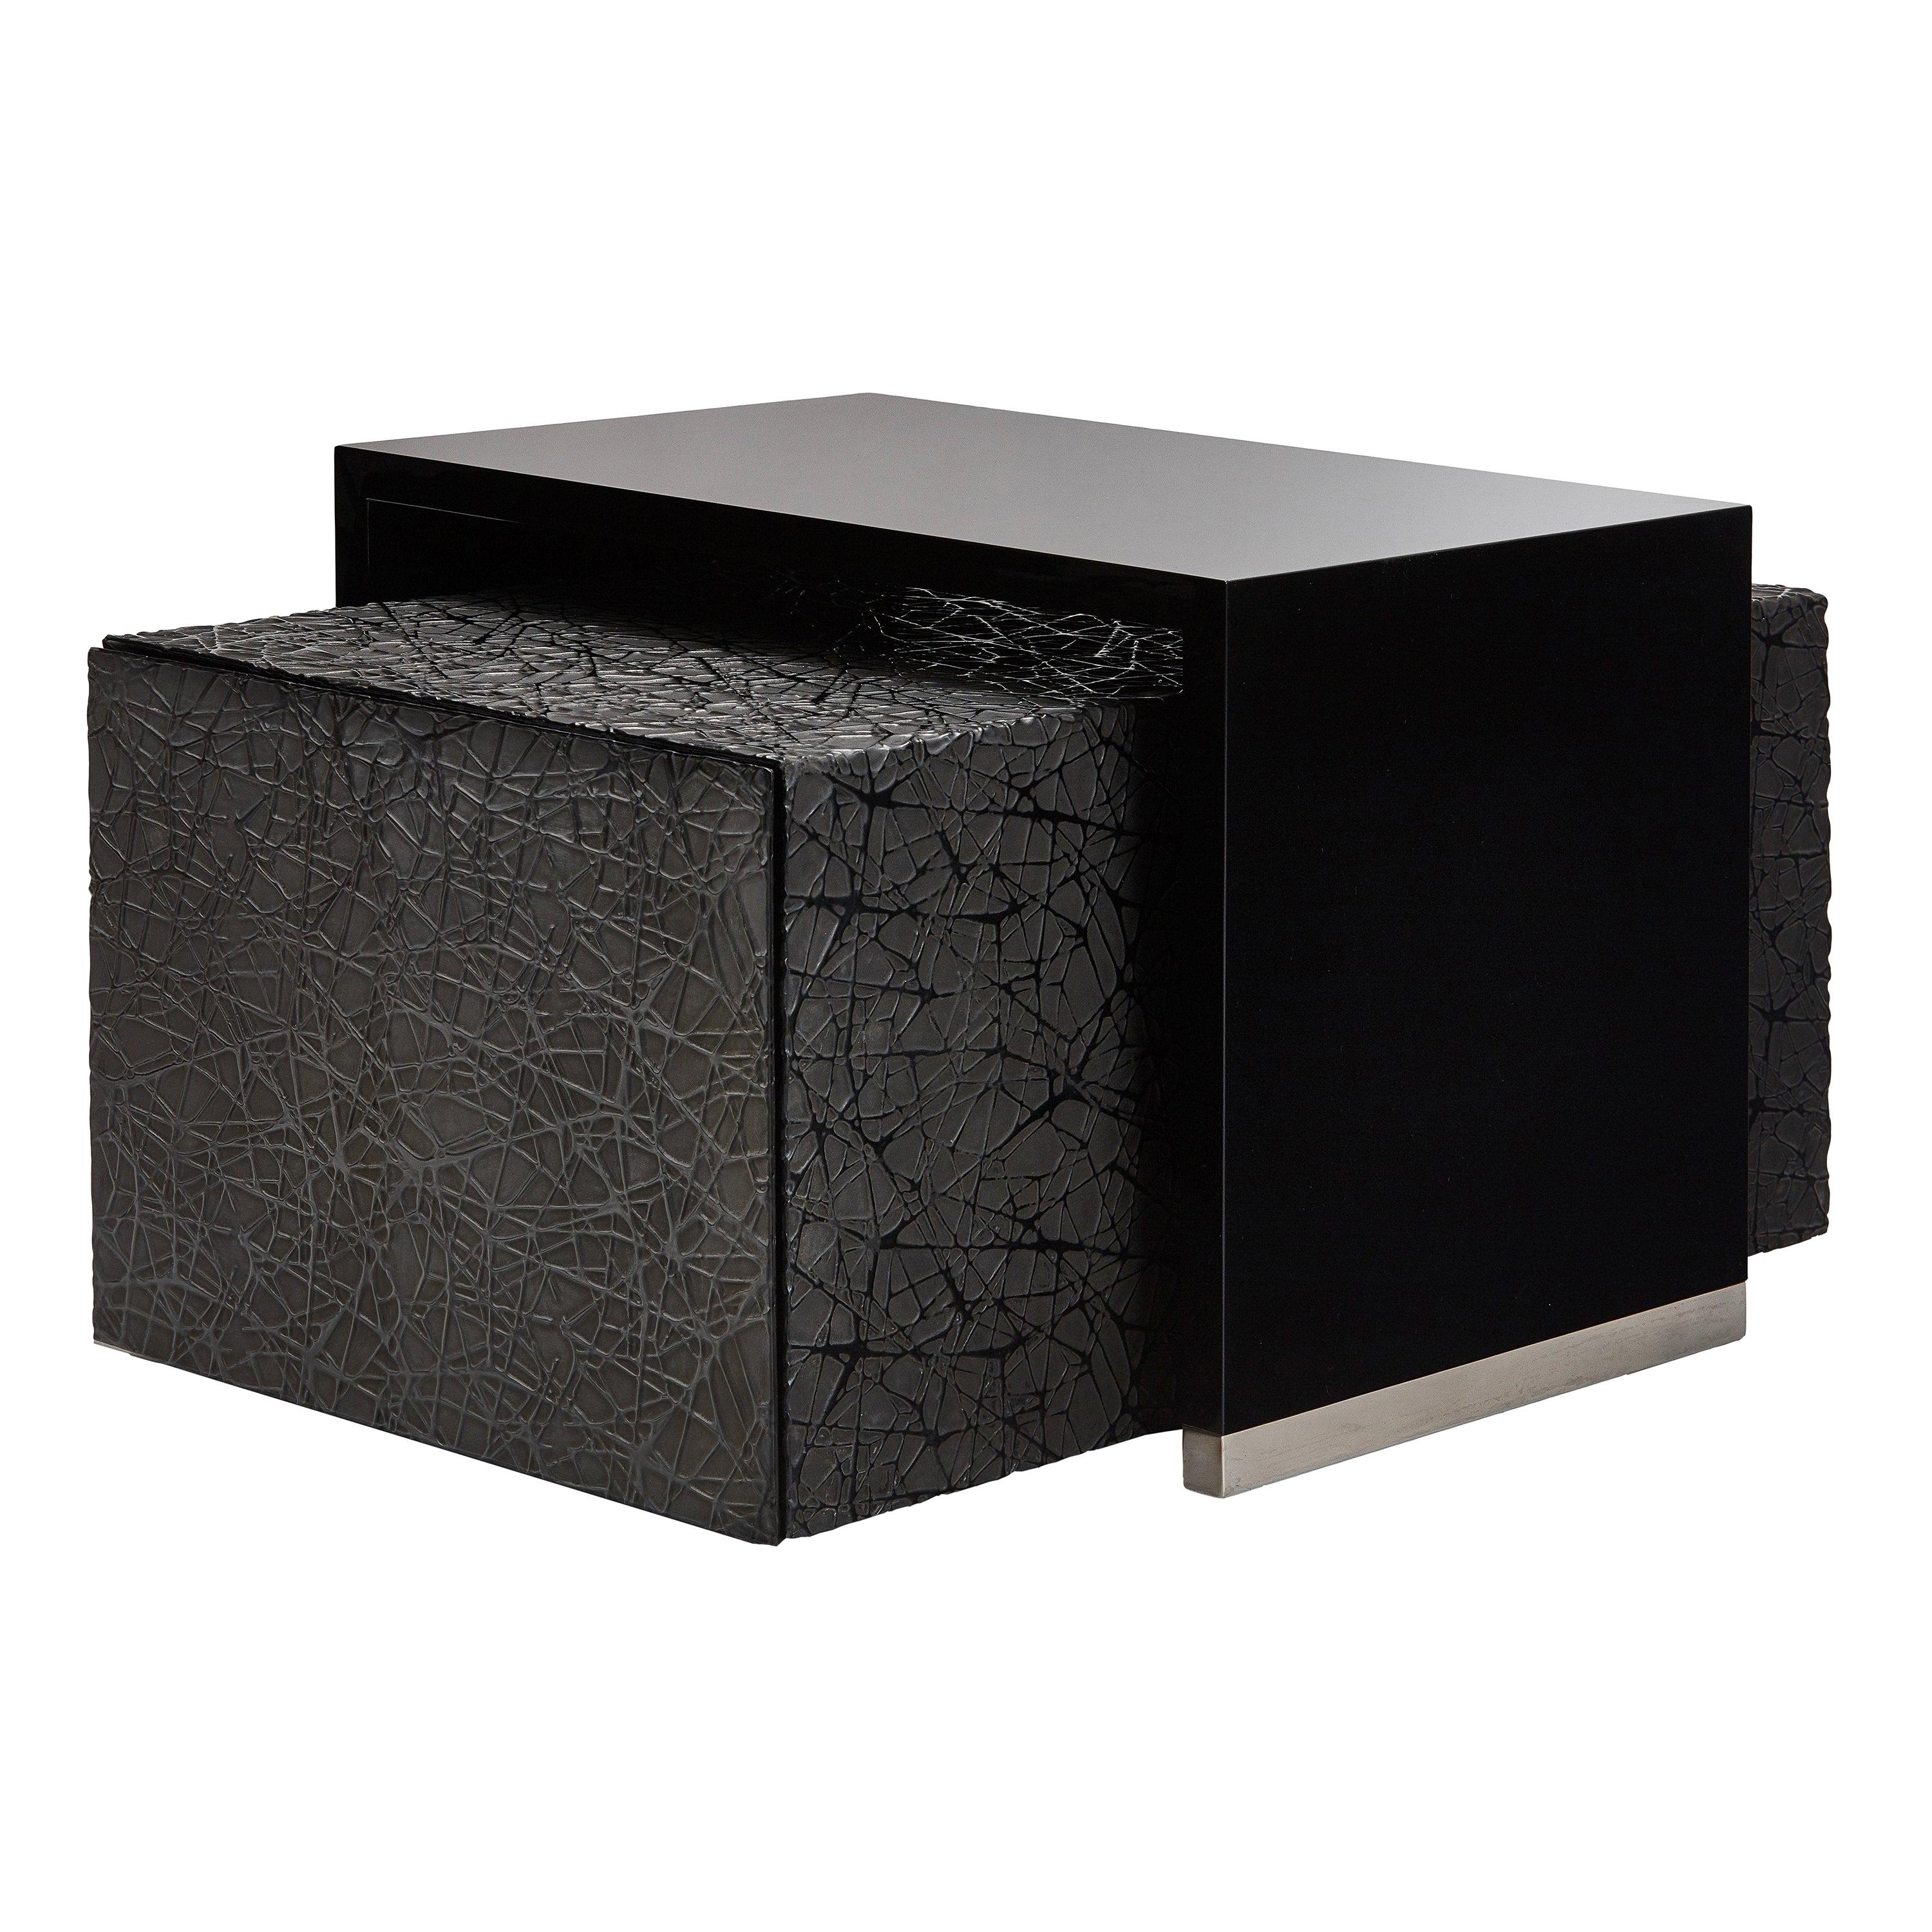 Duo Side Tables with Piano Black Lacquer and Resin Art Texture For Sale